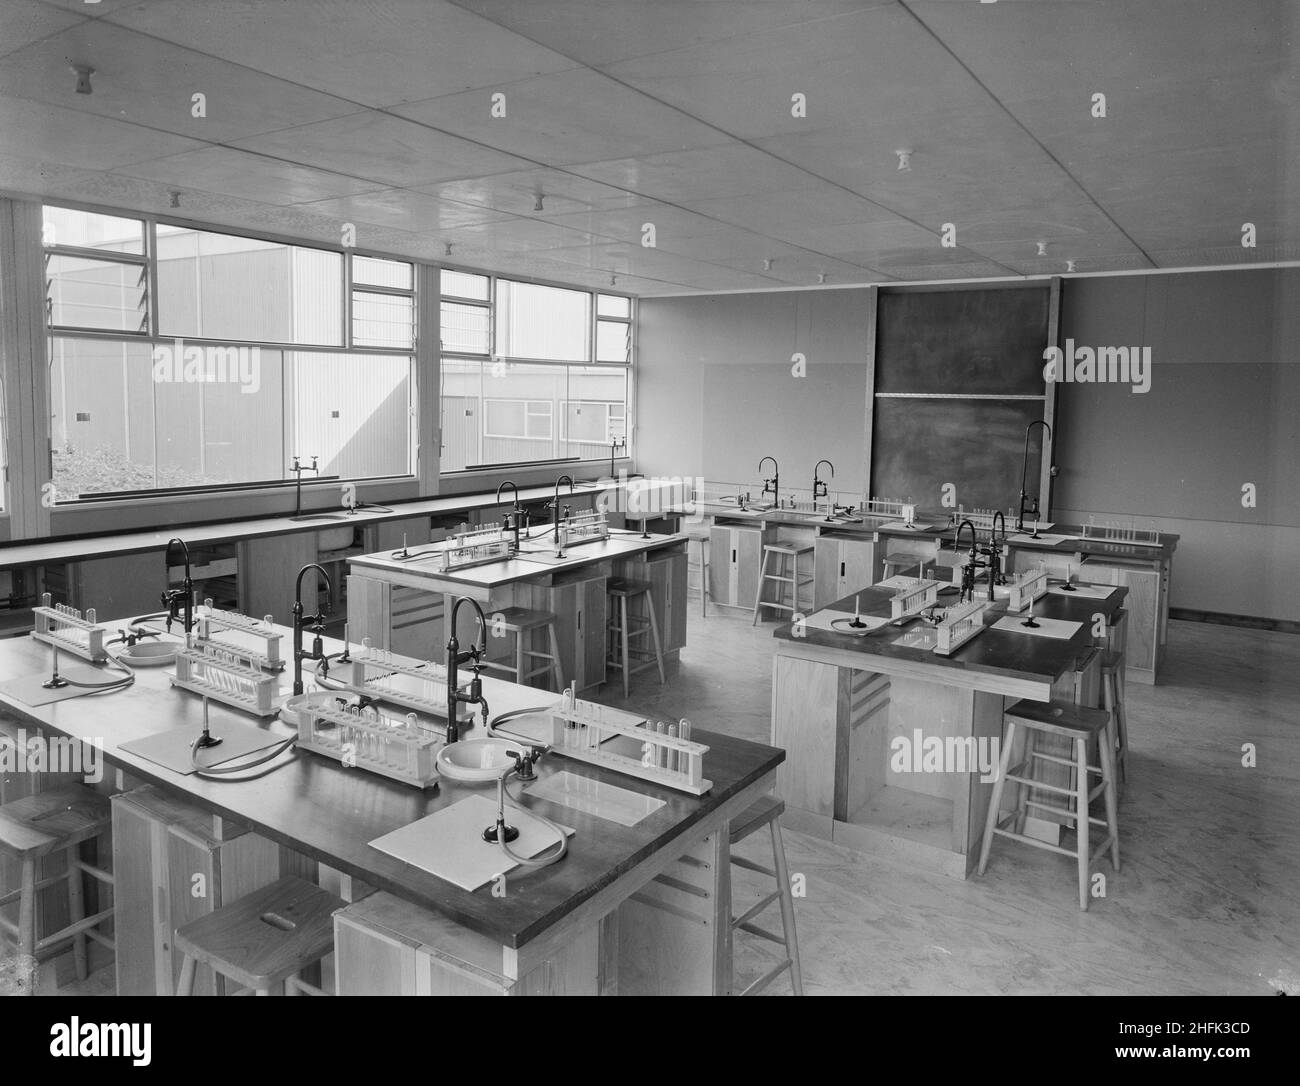 County High School, Gedling Road, Arnold, Gedling, Nottinghamshire, 11/09/1959. The interior of one of the science laboratories at Arnold County High School, showing island benches equipped with sinks, gas taps with Bunsen burners and racks of test tubes. The science block housed chemistry, biology, physics, mathematics and general science laboratories on the ground and first floor, and on the second floor was a lecture theatre with raised seating, an optical laboratory and geography and technical drawing rooms. This photograph featured in the October 1959 issue of Team Spirit, the Laing compa Stock Photo